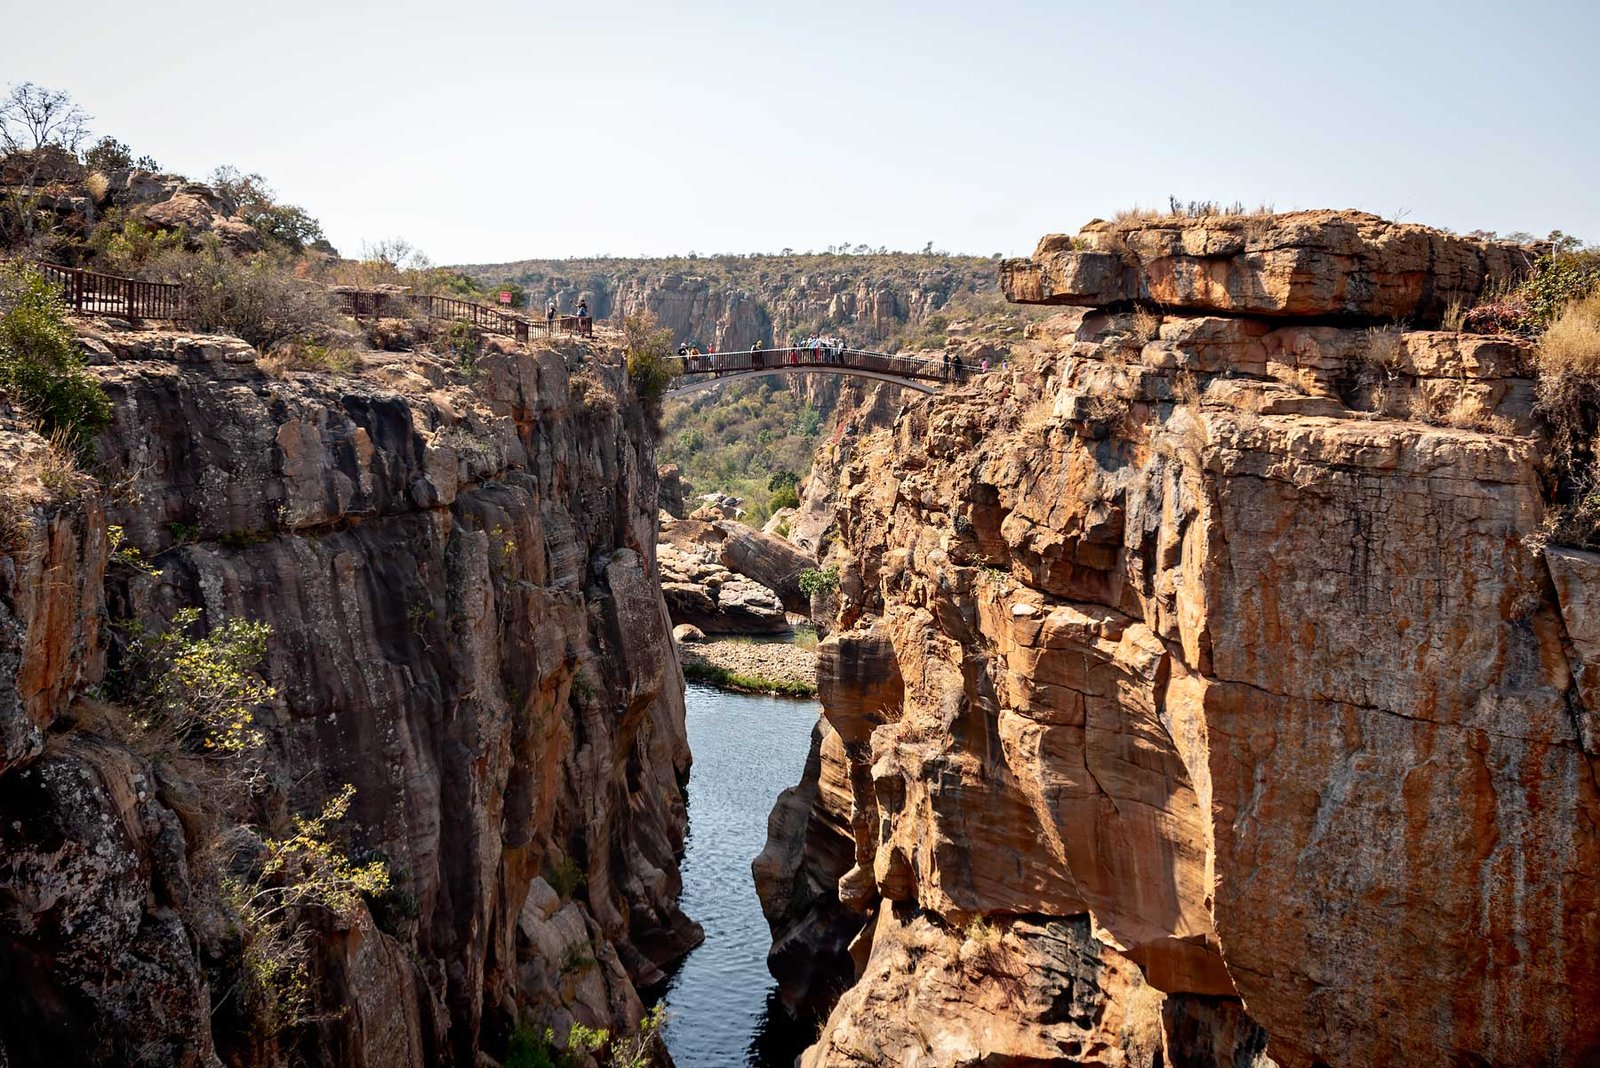 Bourke’s Luck Potholes at the Blyde River Canyon. South Africa in 3 Weeks | The Perfect South Africa itinerary for your first trip.